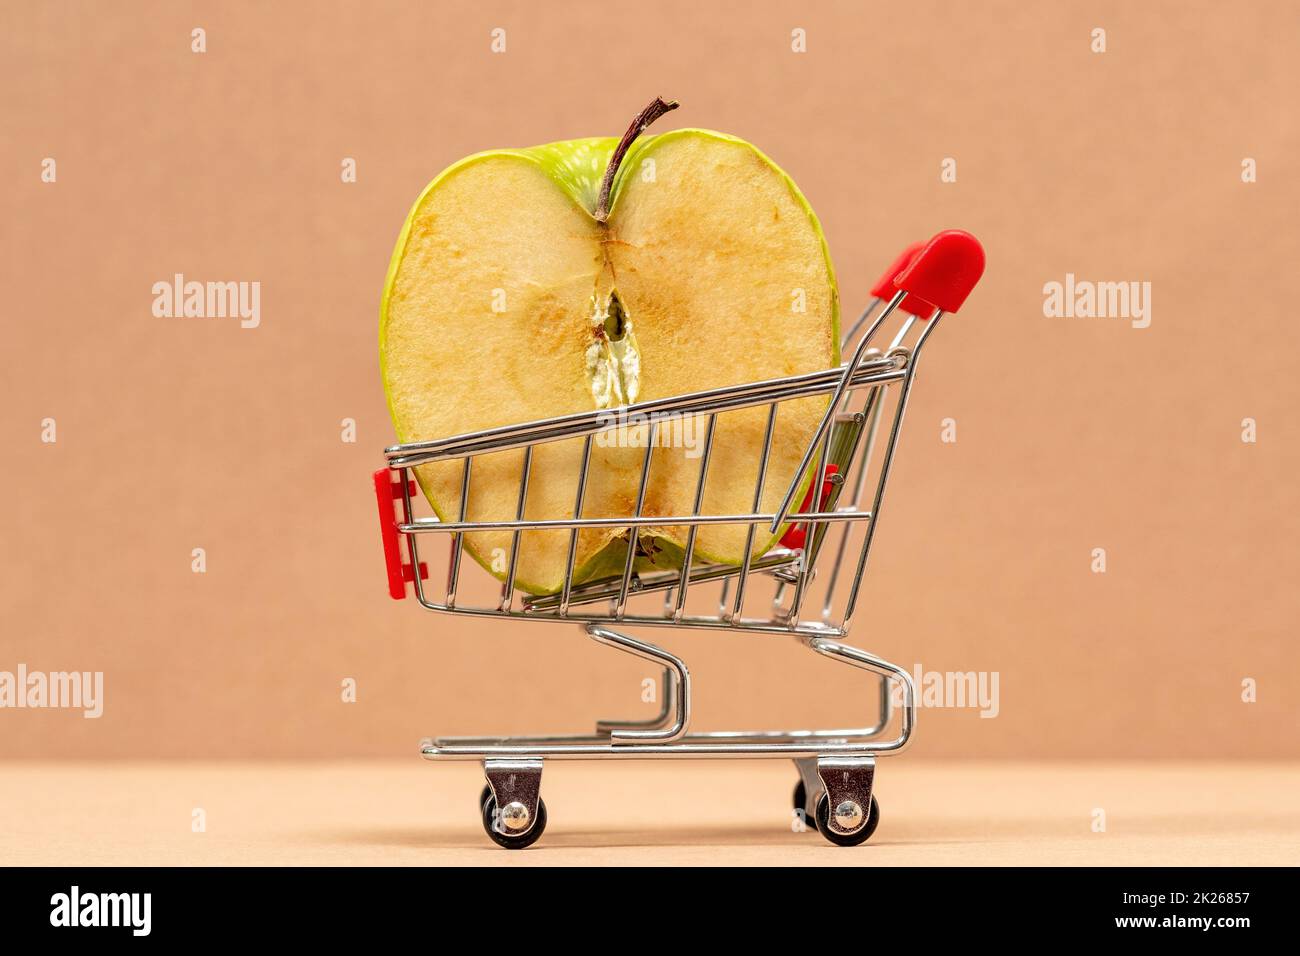 Half of apple in small supermarket shopping cart Stock Photo